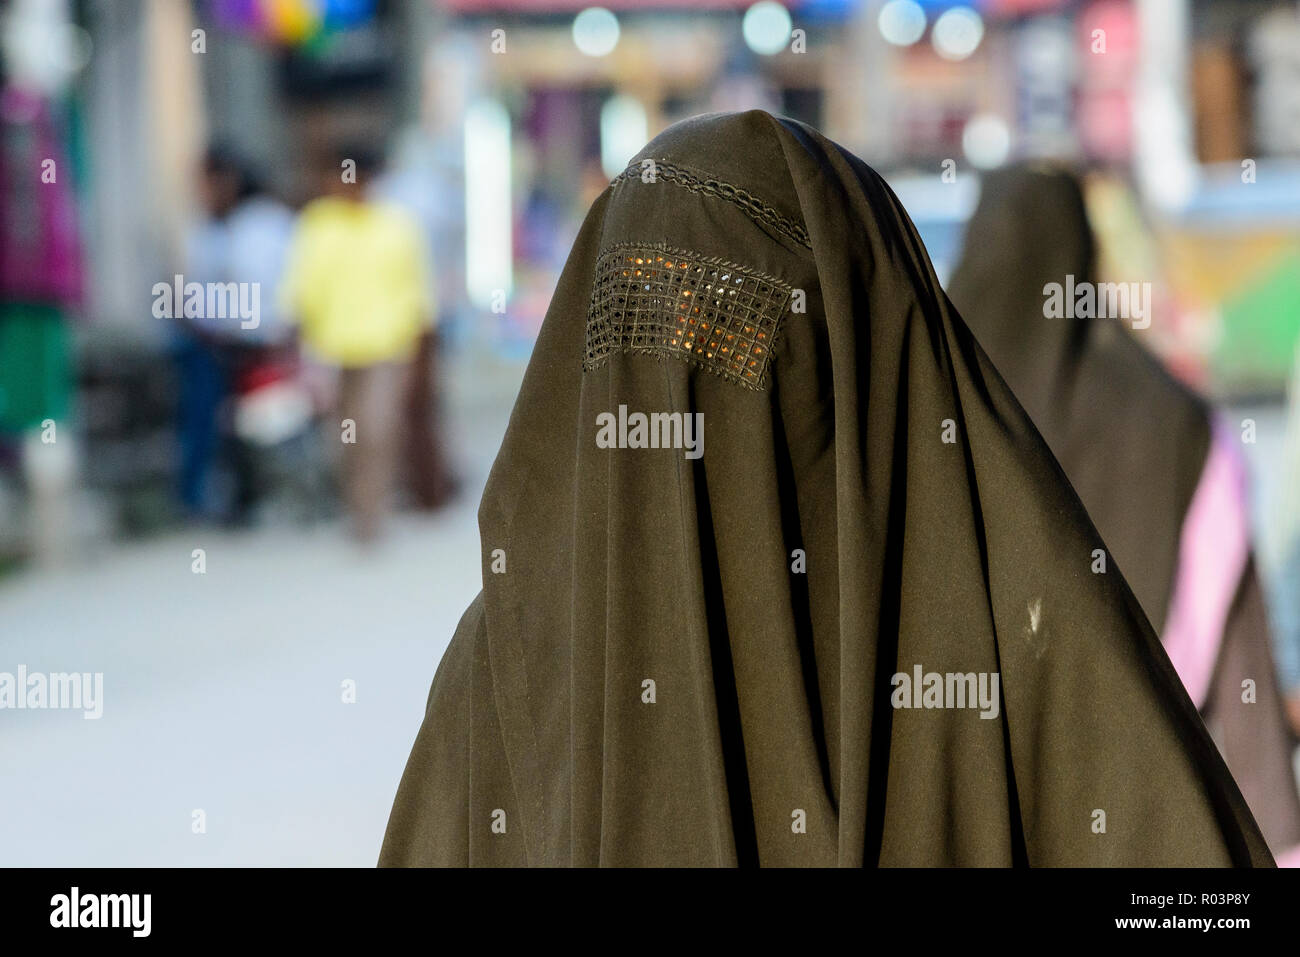 The Burga, covering the whole body and the face, is an black outer garment worn by many Kashmiri women and female teenagers in public spaces Stock Photo